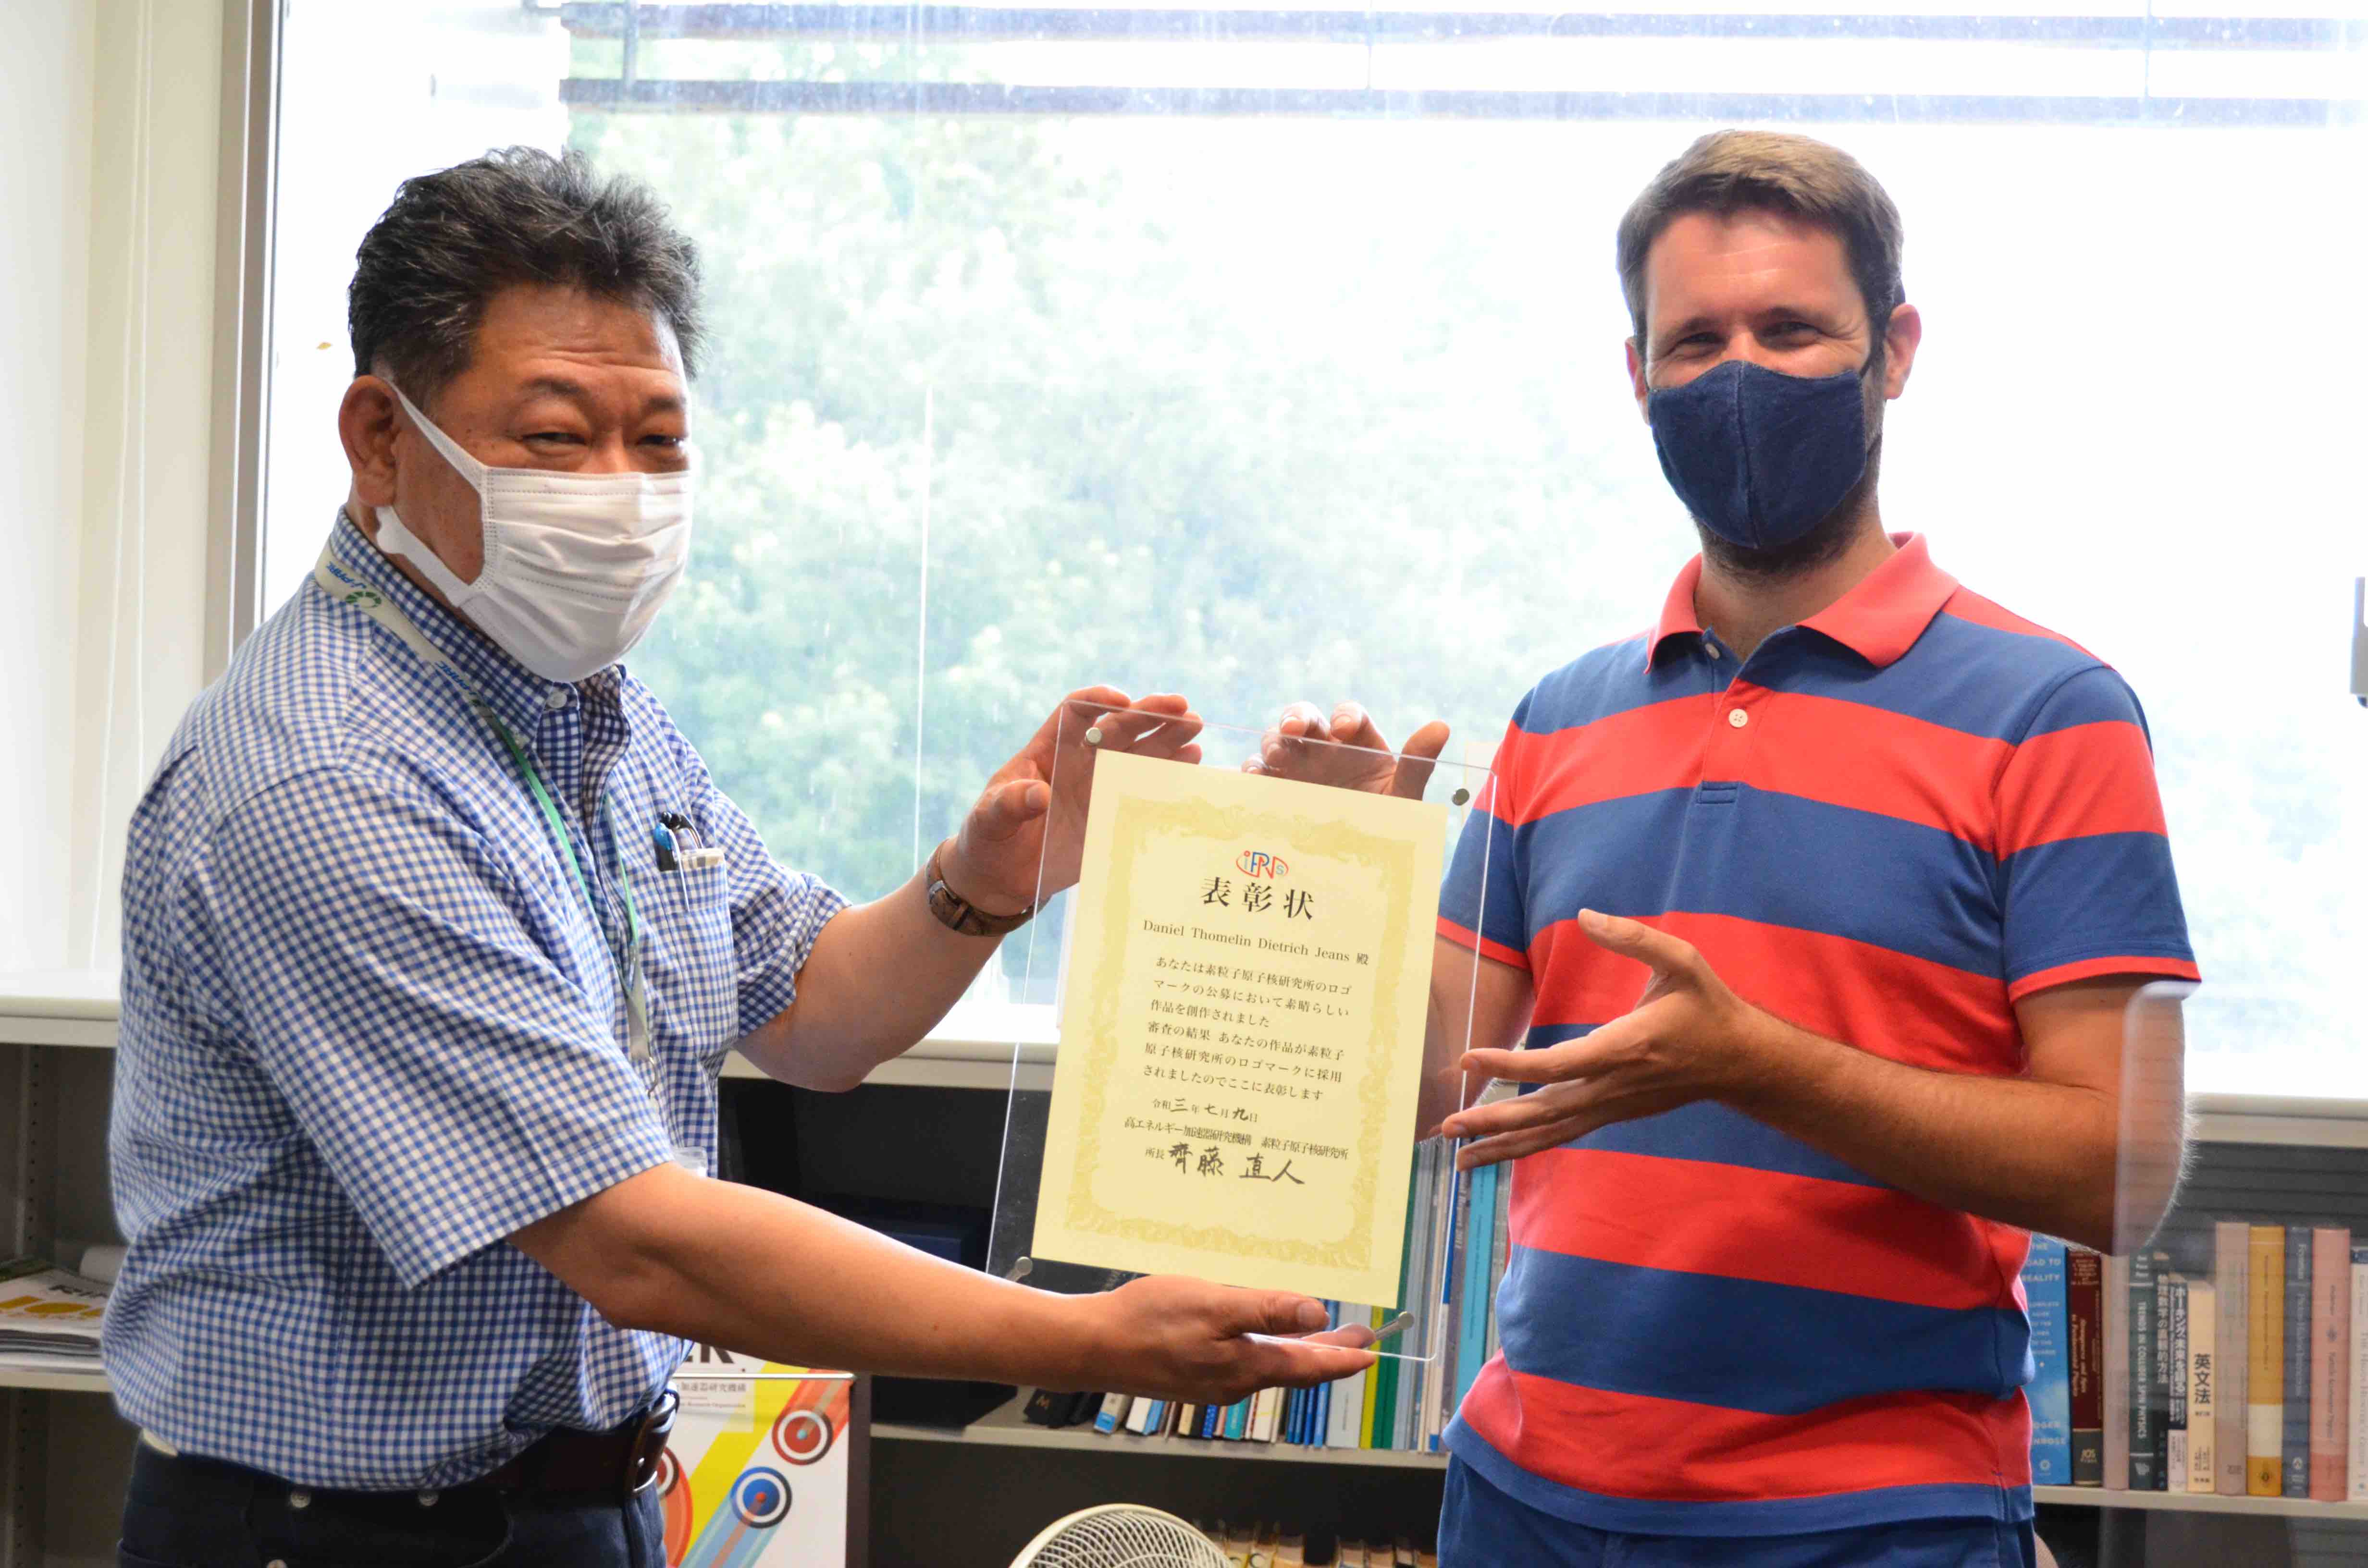 Associate professor Daniel Jeans (on the right) receives a certificate of merit from IPNS Director Naohito Saito (on the left).